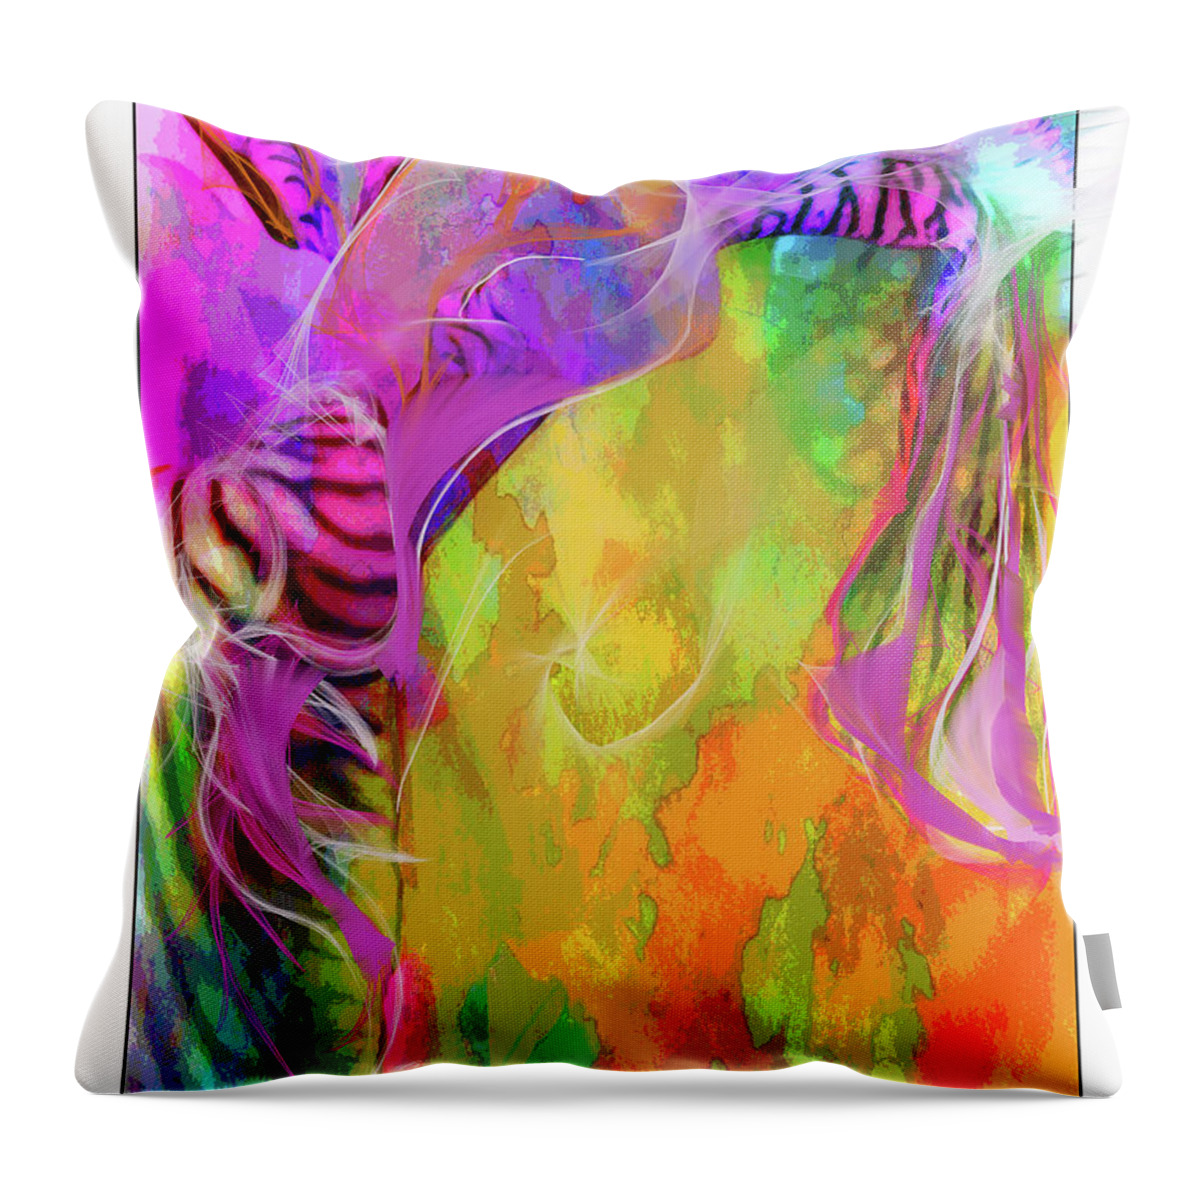 Flower Throw Pillow featuring the digital art Iris Psychedelic by Cindy Greenstein